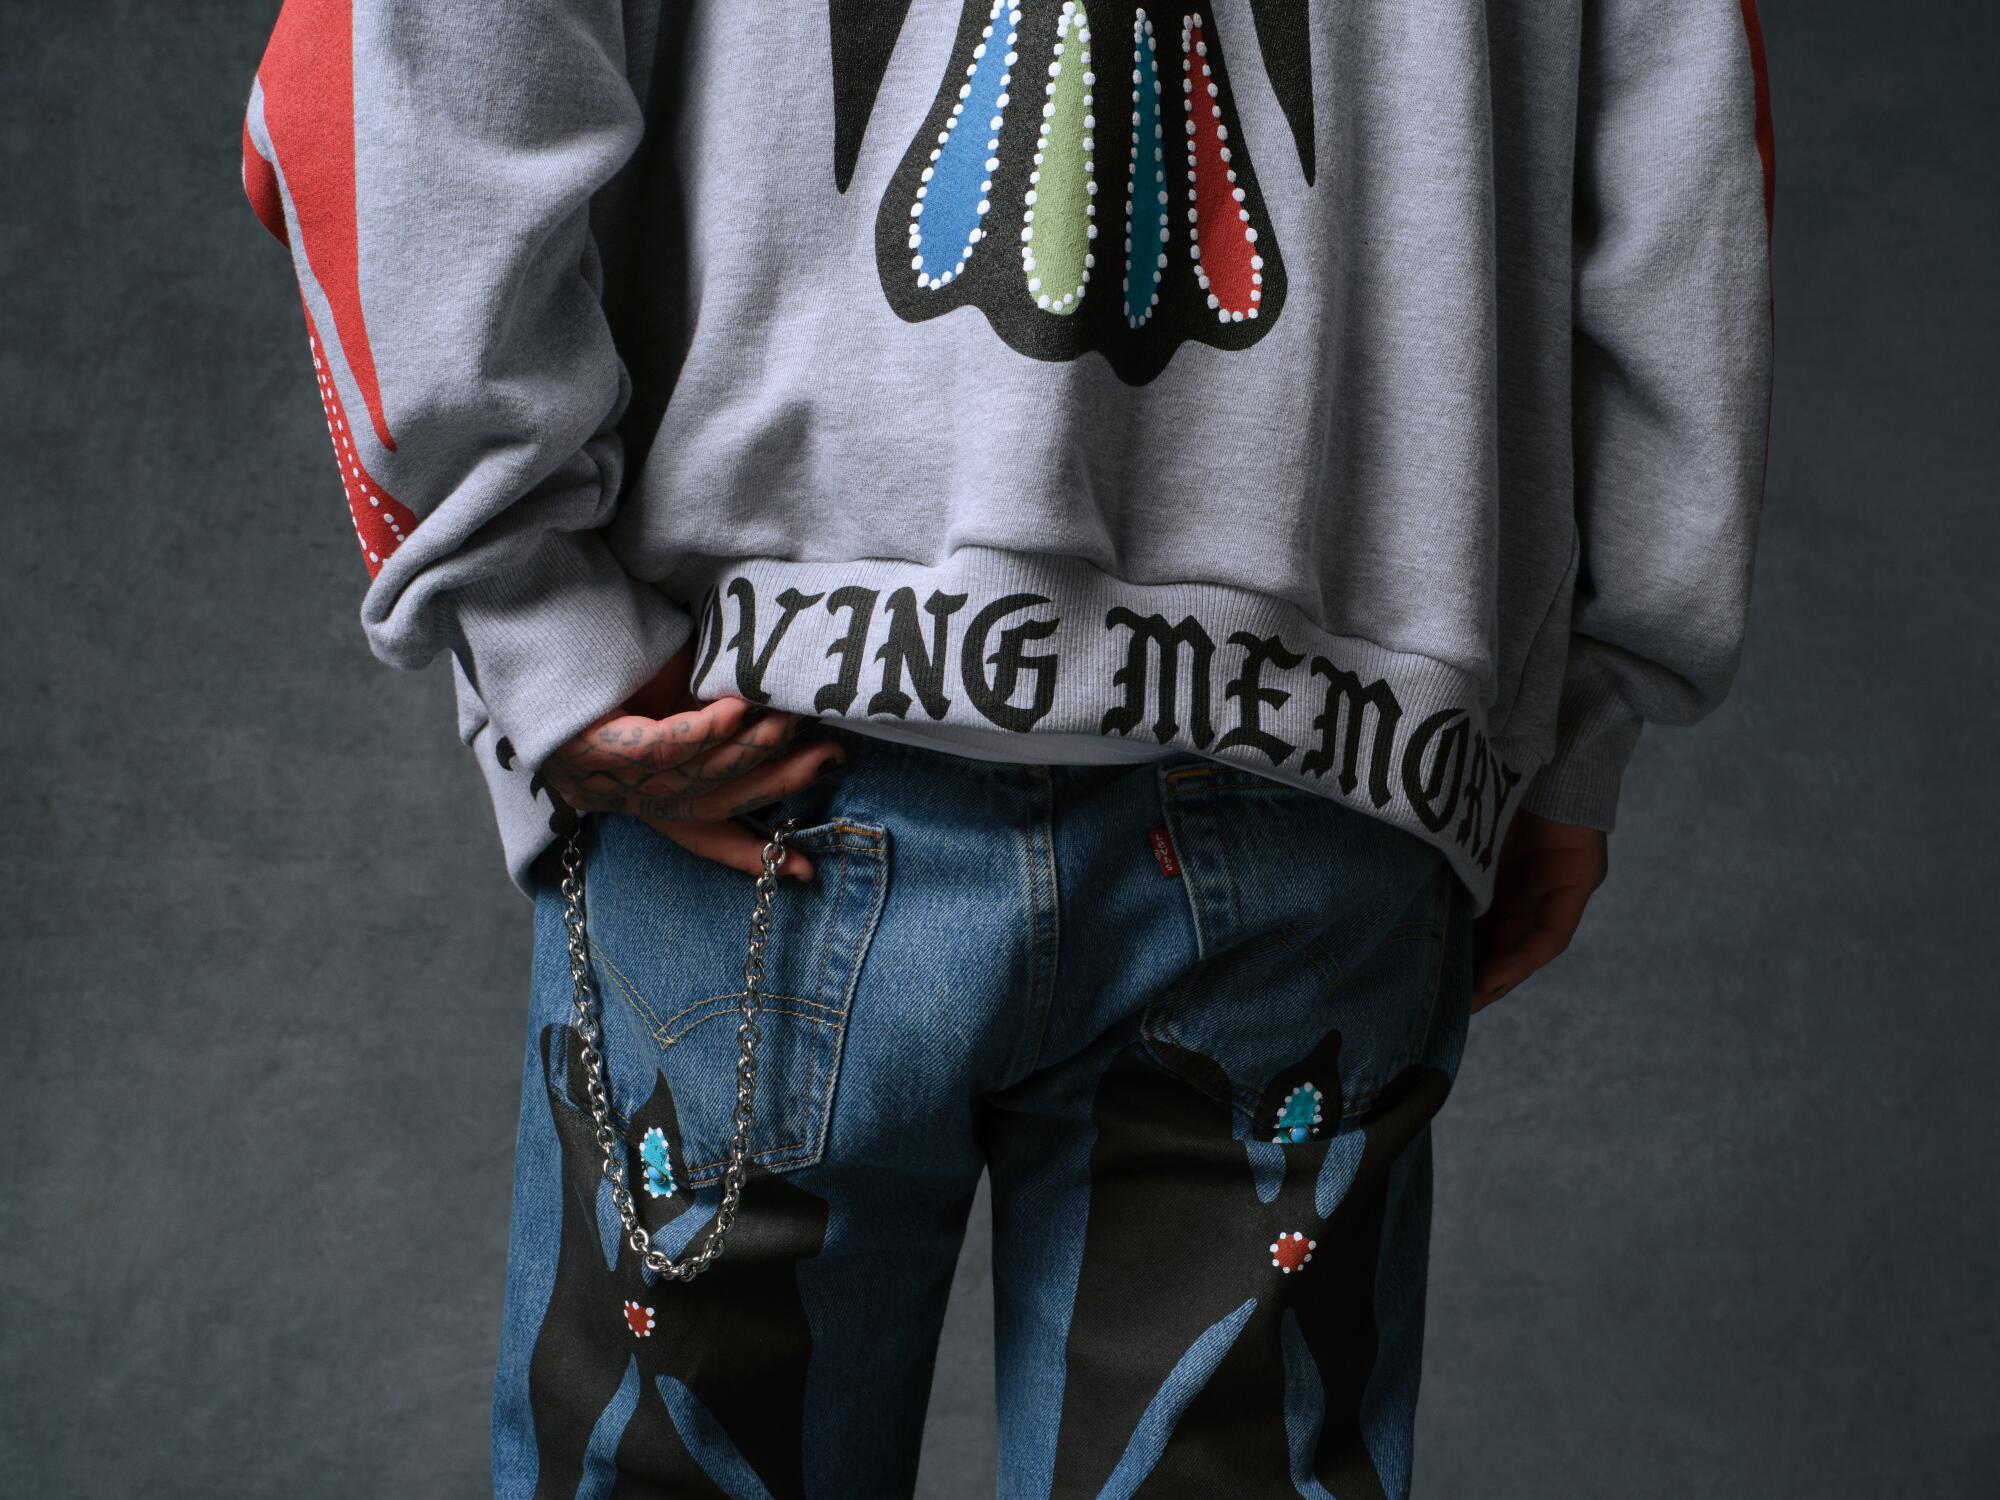 A person wears a sweatshirt with the words "In loving memory" embroidered